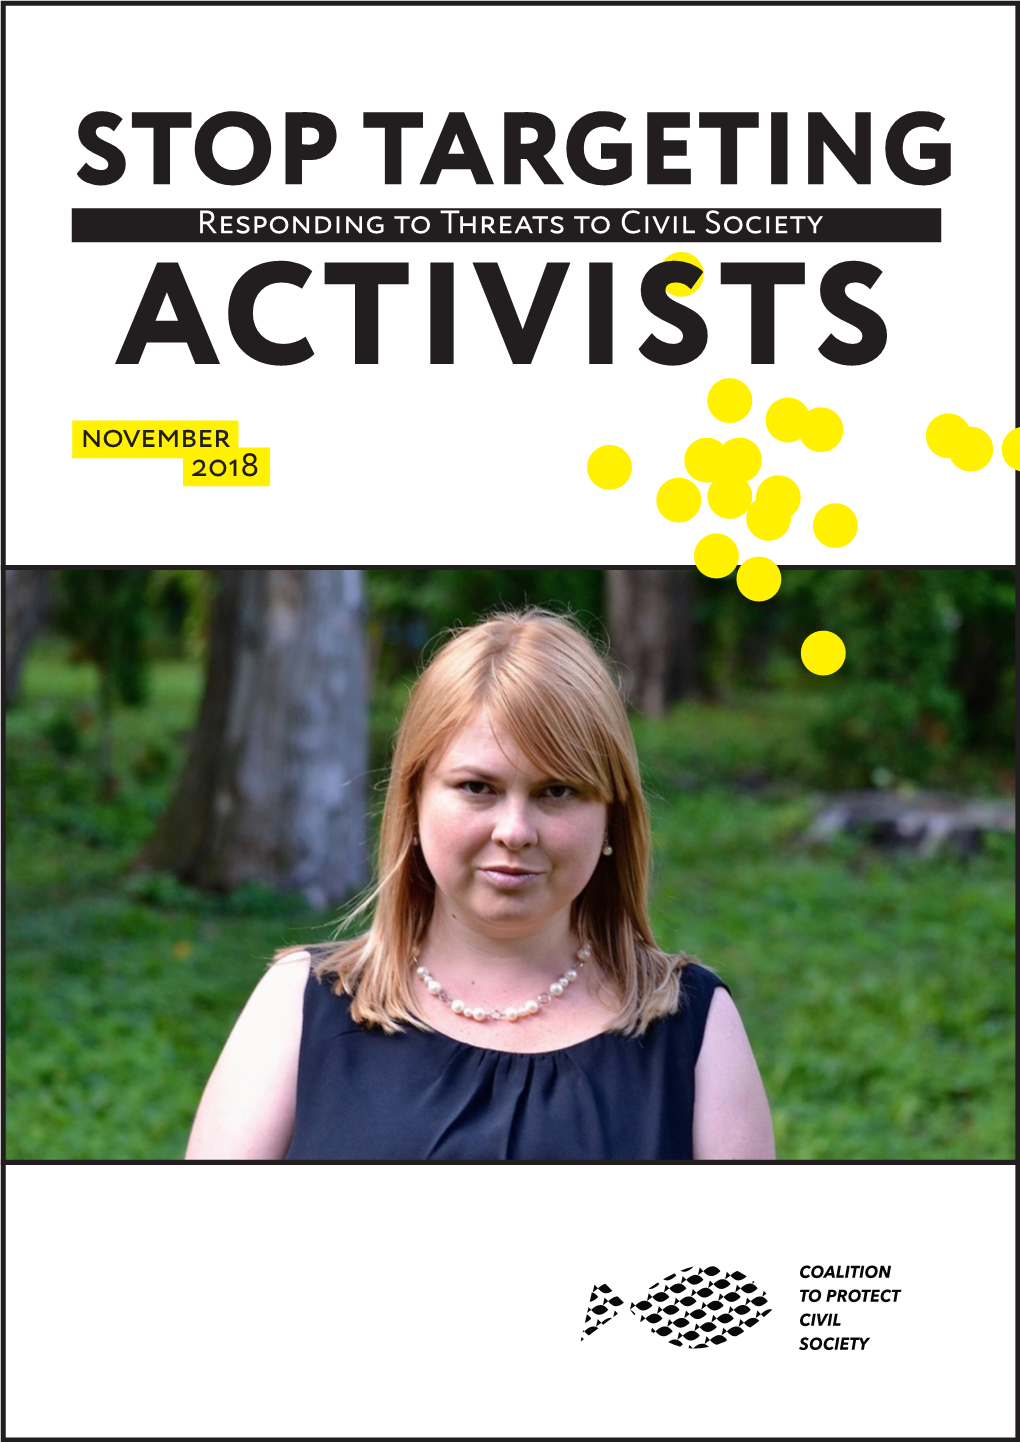 ACTIVISTS November 2018 in 2014, She Became an Active Member of the IMPUNITY Euromaidan Movement in Kherson